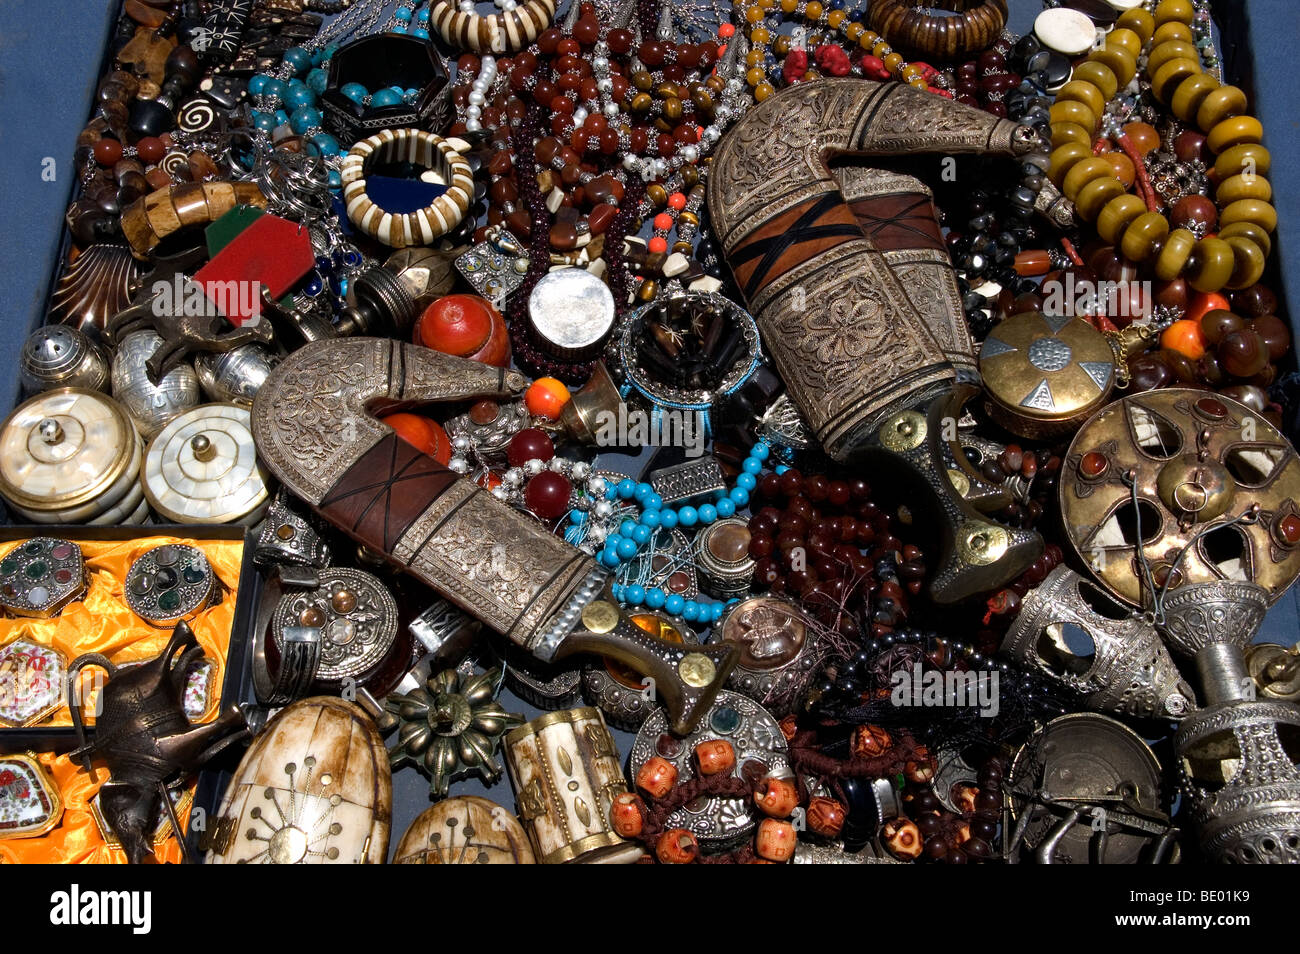 A box filled with traditional jewellery and antiques at an antiques store the old city of Sana'a in Yemen. Stock Photo